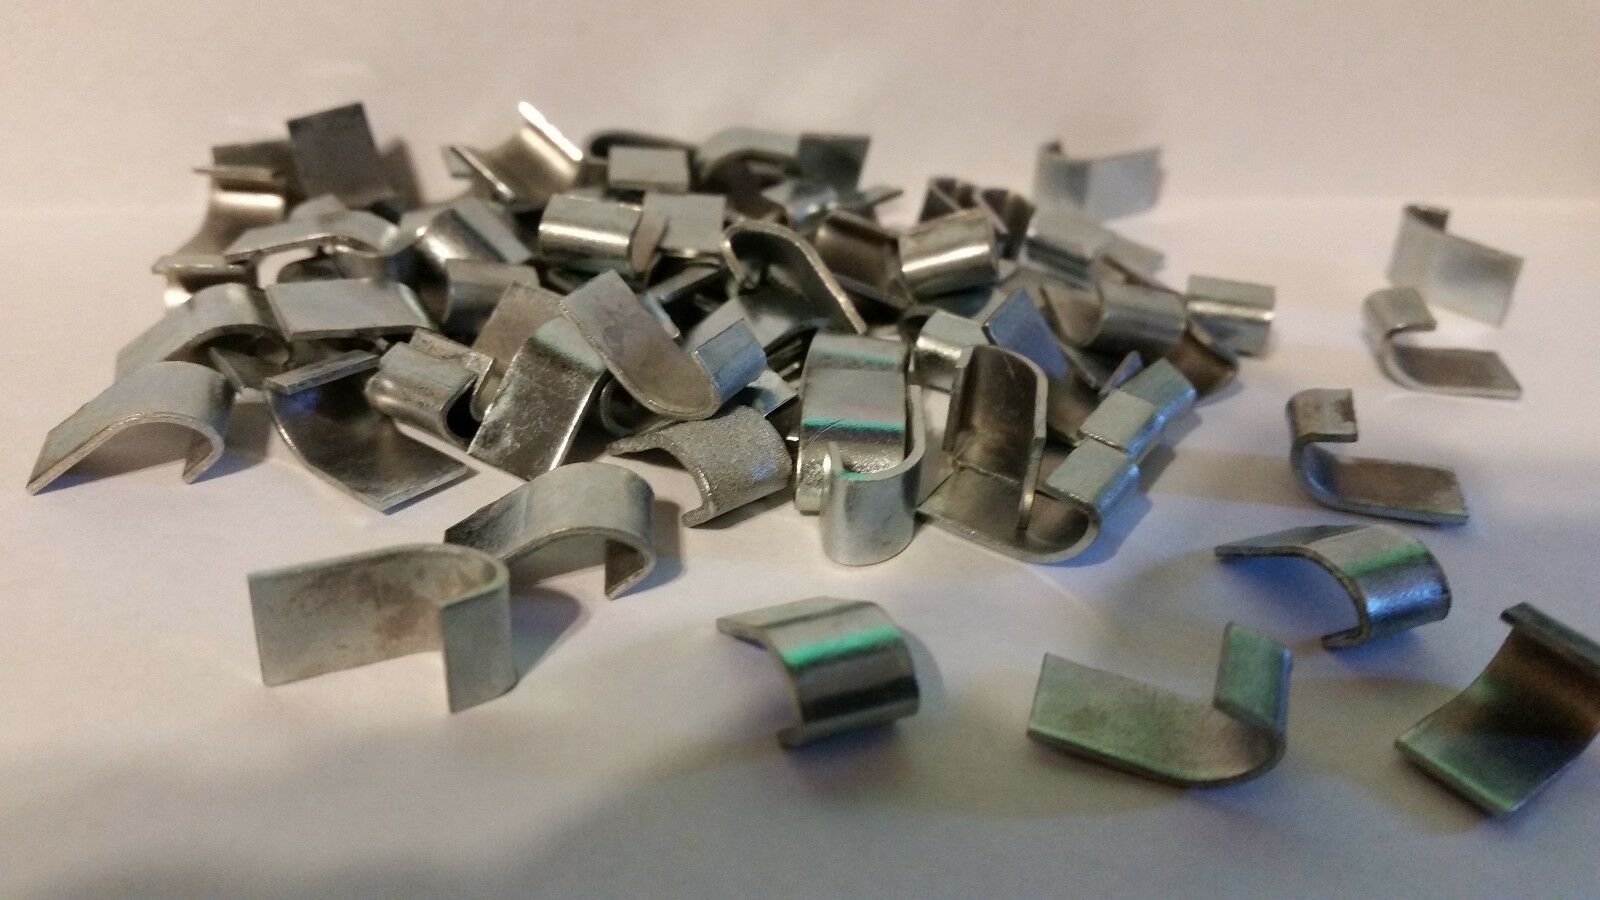 100 Zinc Plated J Clips. Cage Clips For Rabbit Poultry Game Bird Cage Free Ship